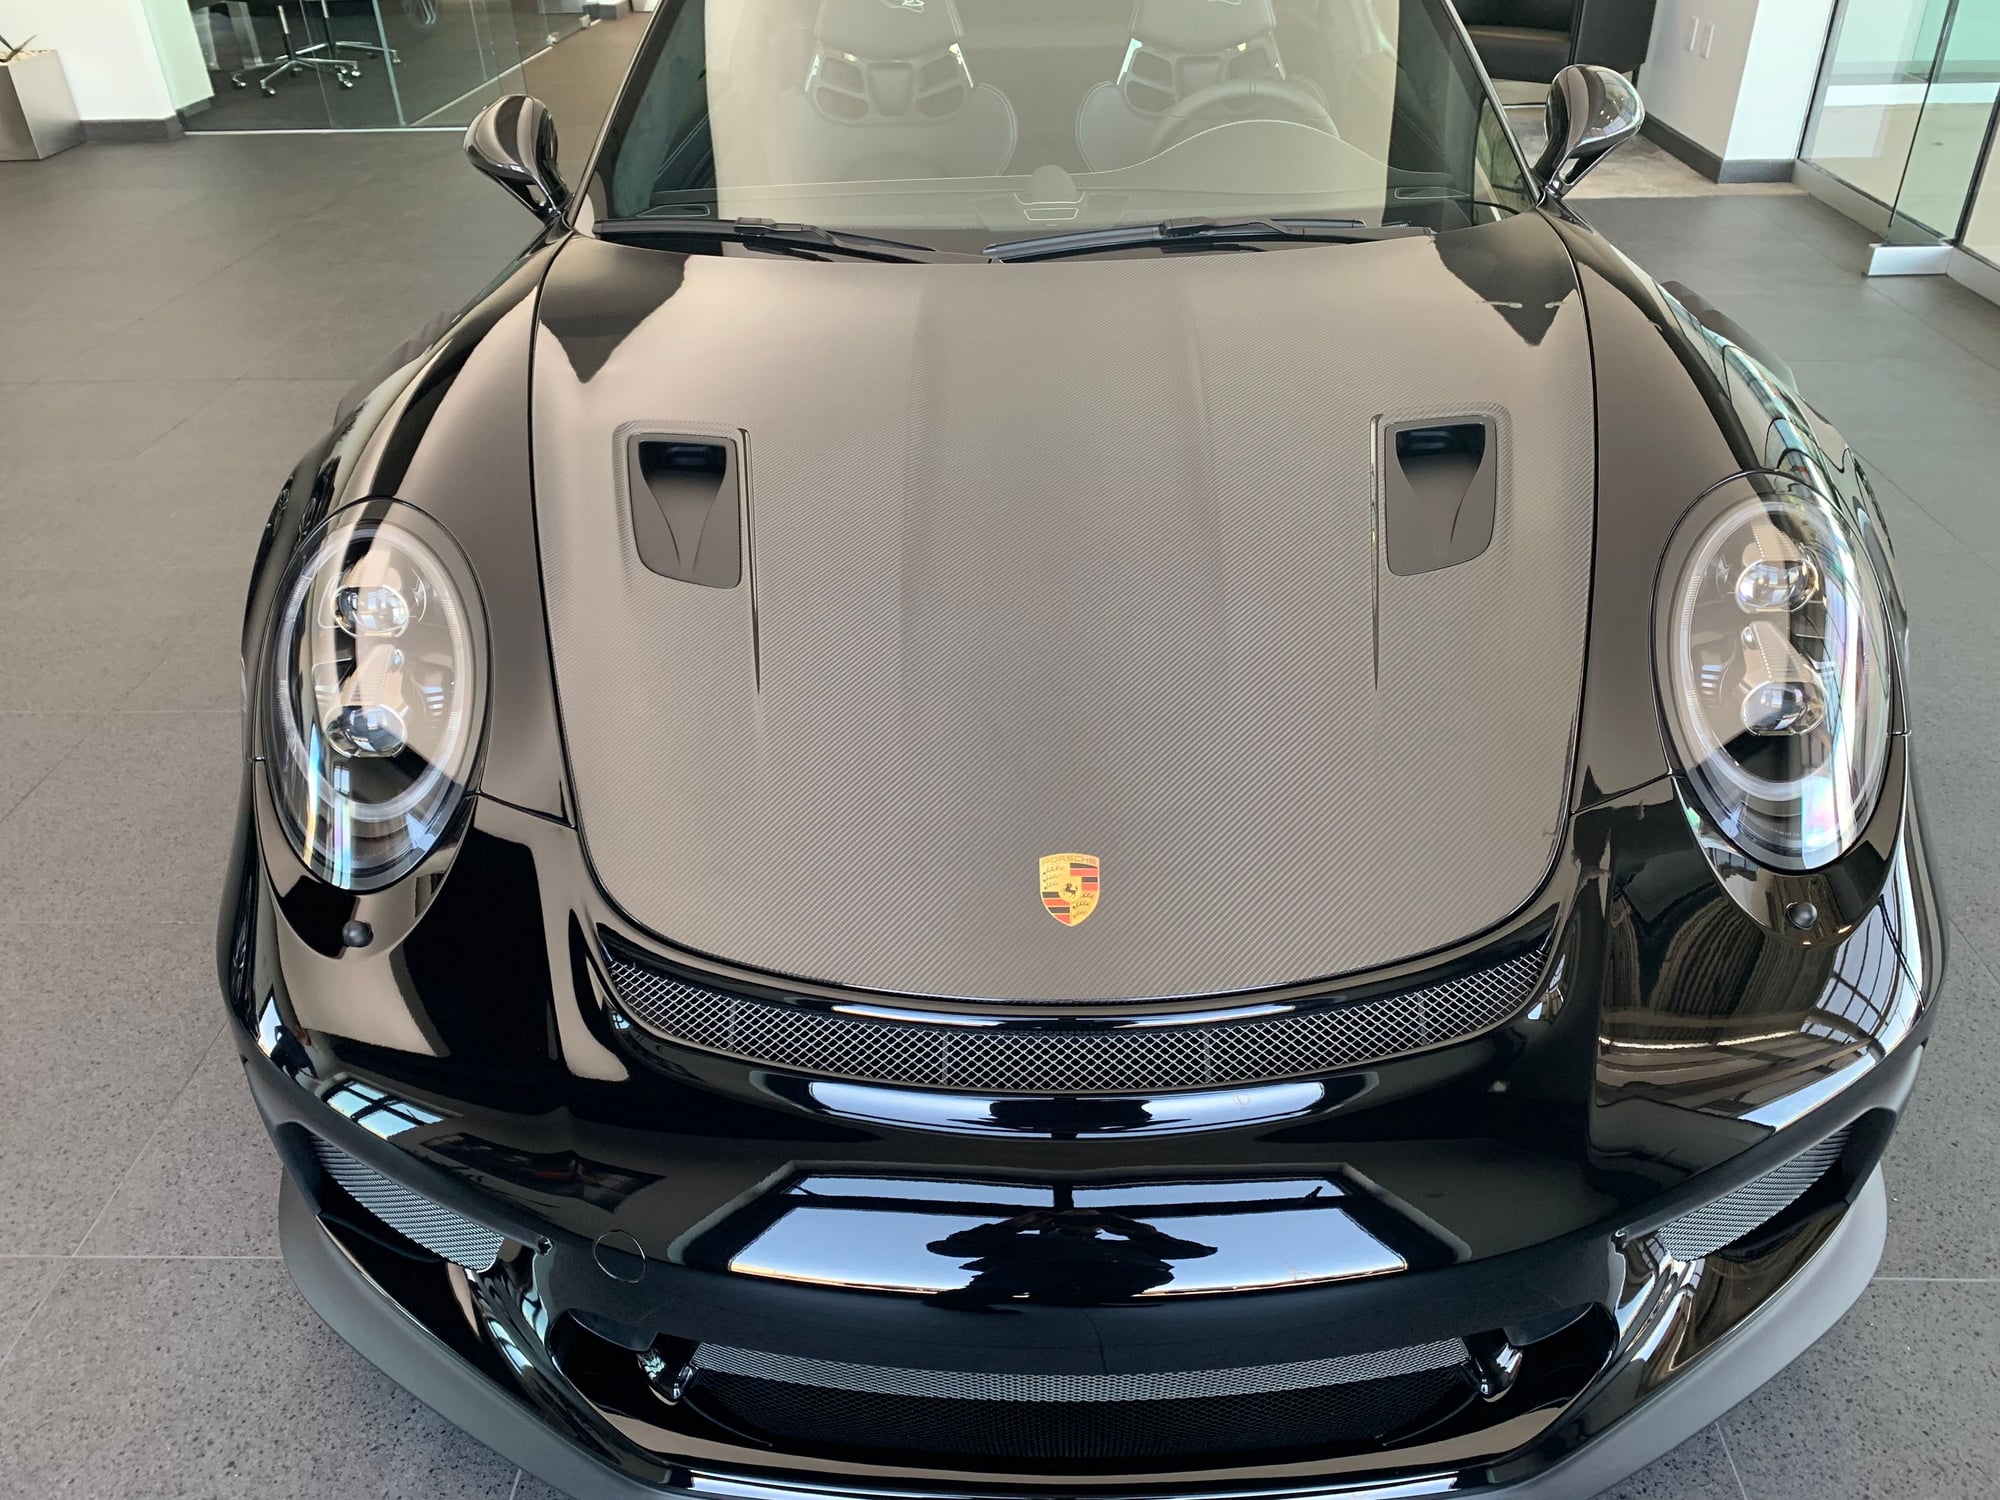 2019 Porsche GT3 - 2019 GT3RS in NEW condition, WP, MAG wheels - Used - VIN WP0AF2A97KS165661 - 1,040 Miles - 6 cyl - 2WD - Automatic - Coupe - Black - Springfield, IL 62711, United States